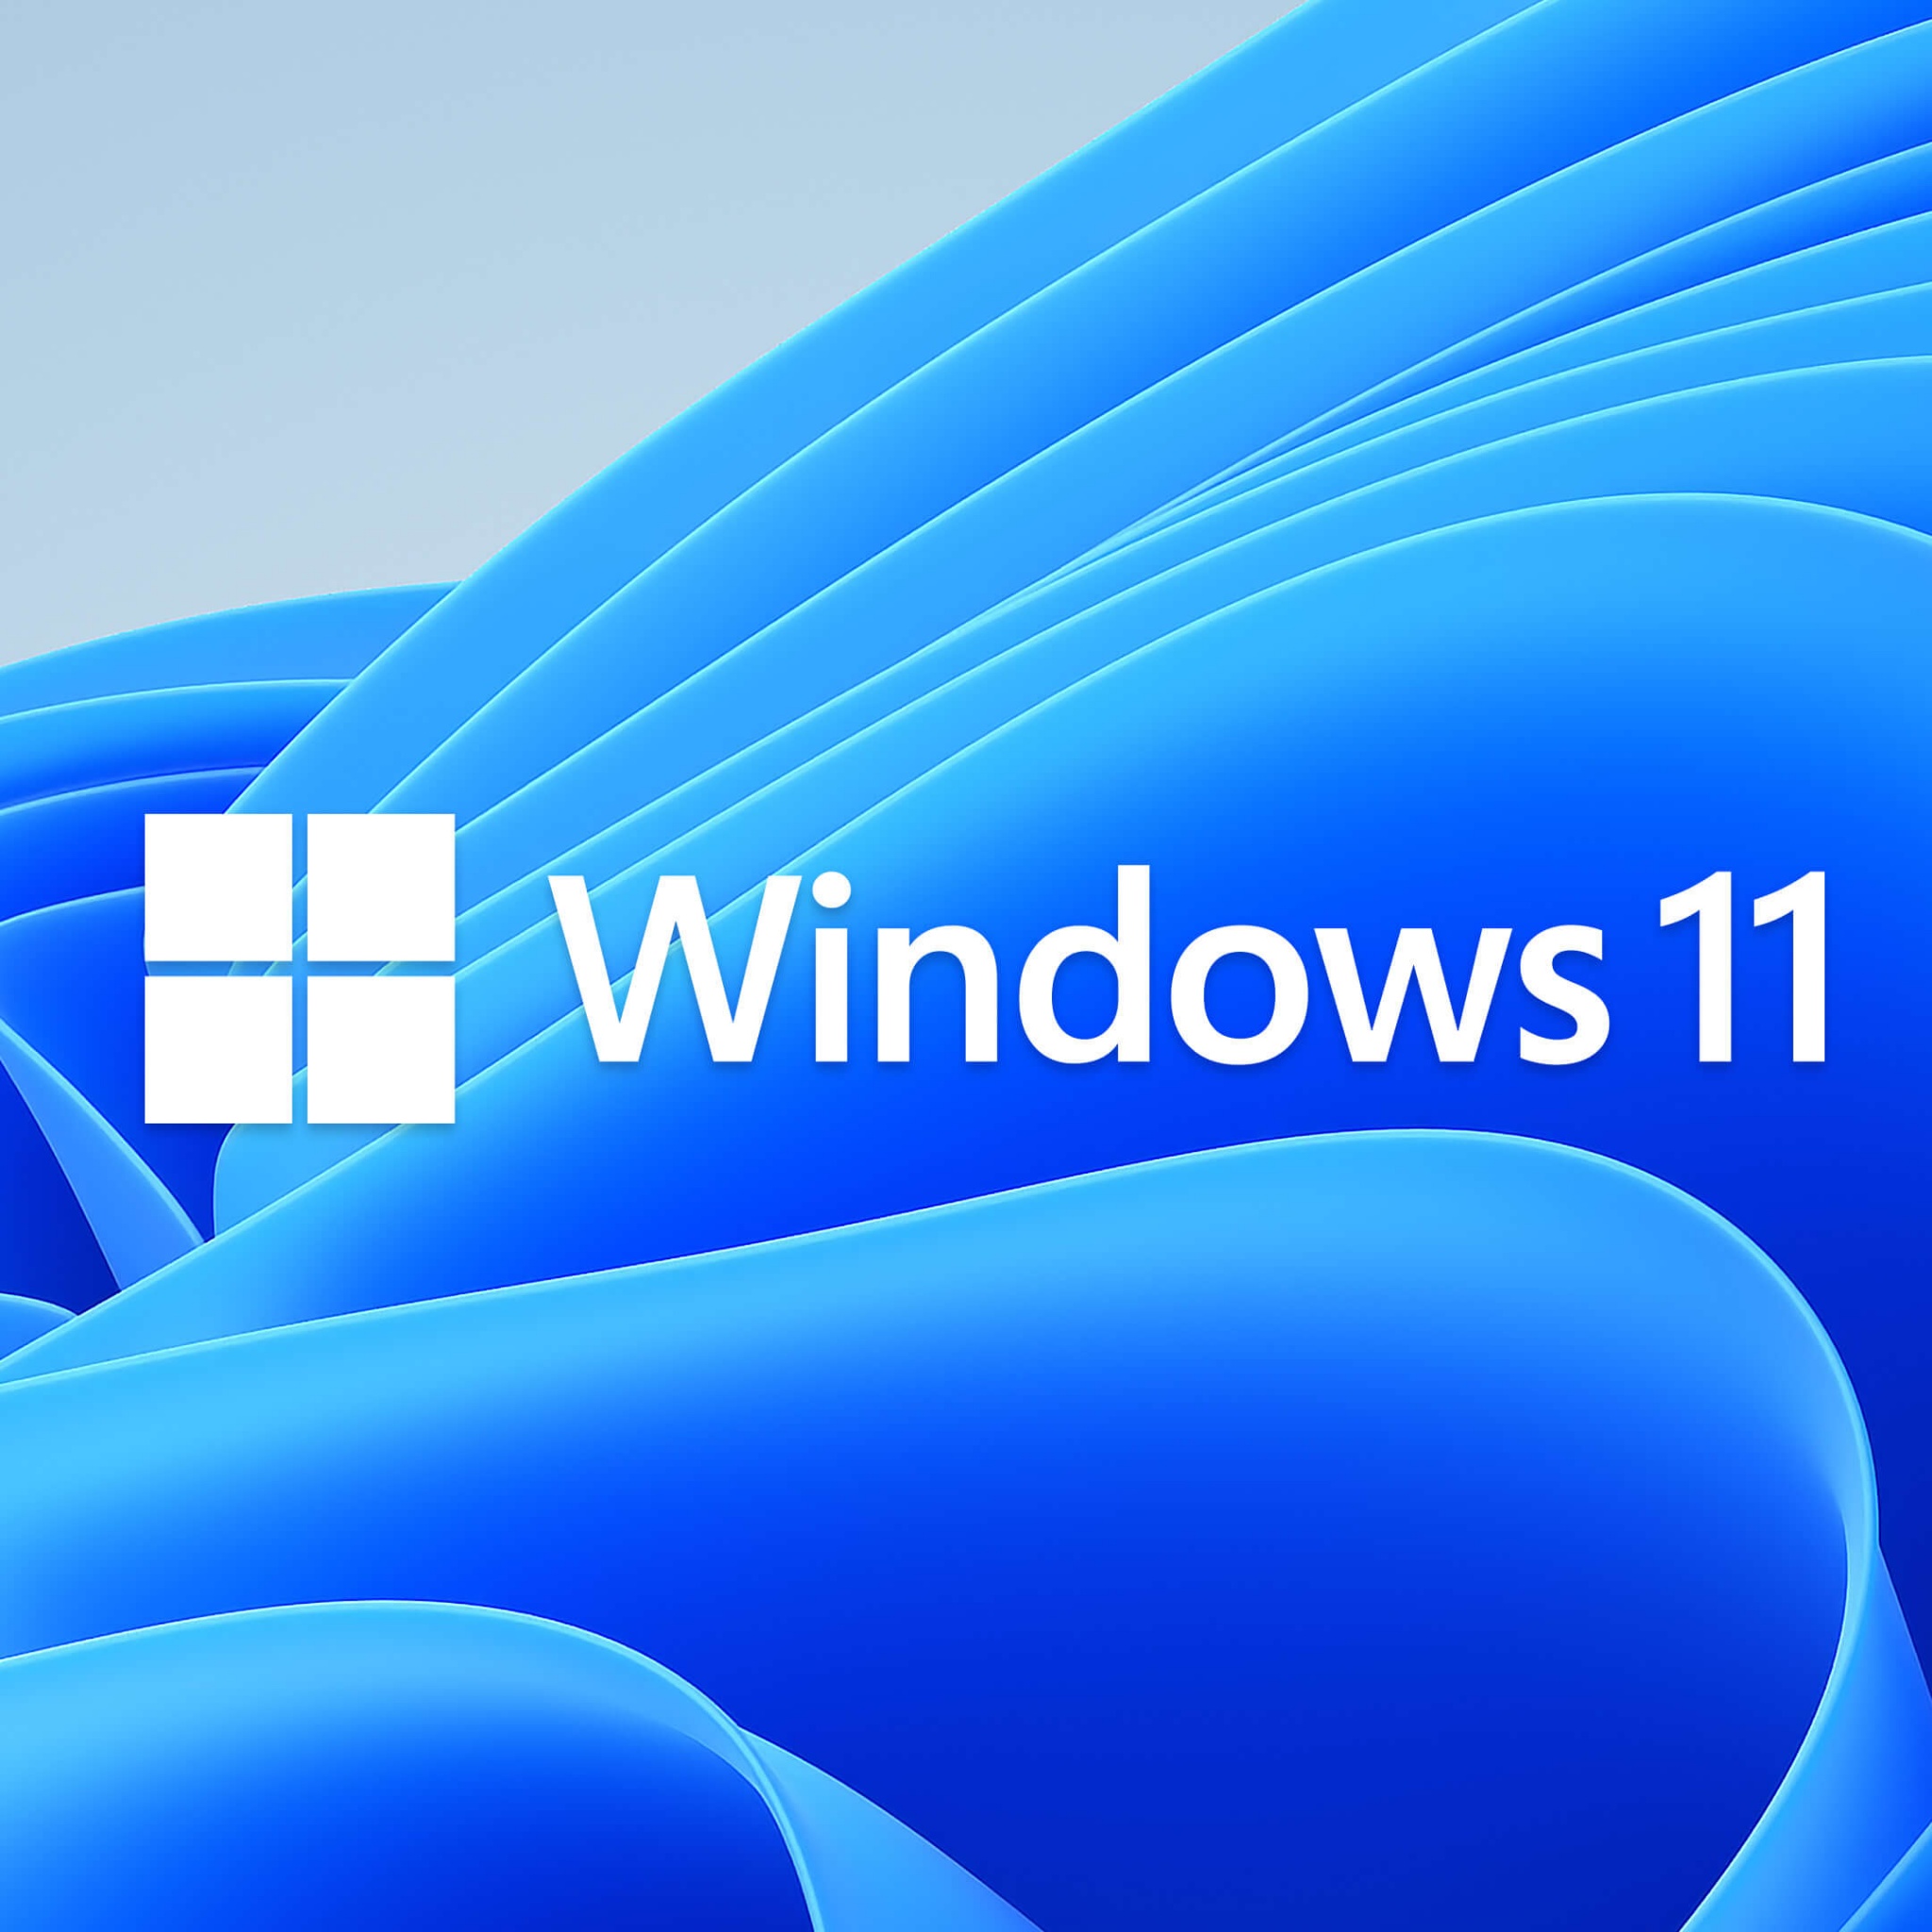 Windows 11 Wallpaper 4K, Stock, Official, Blue background, Abstract, Technology, #5768